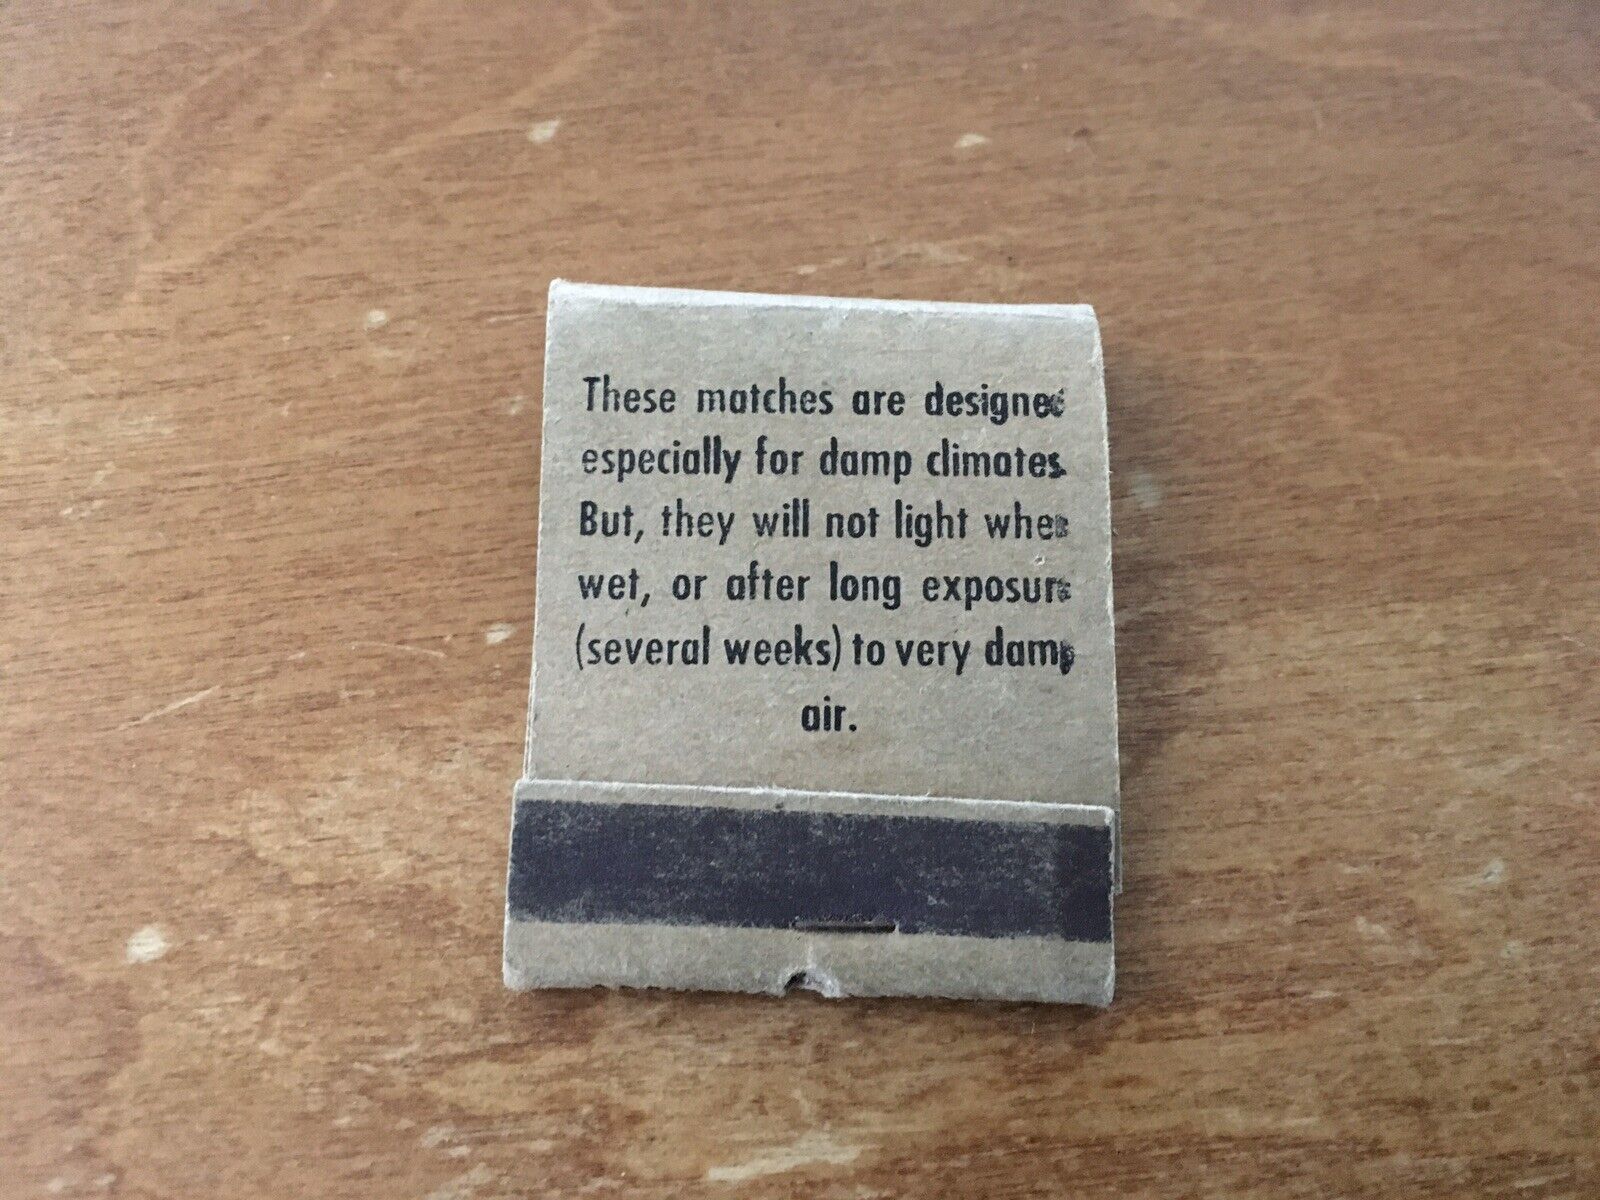 Vintage US Army Matches For Damp Climates.